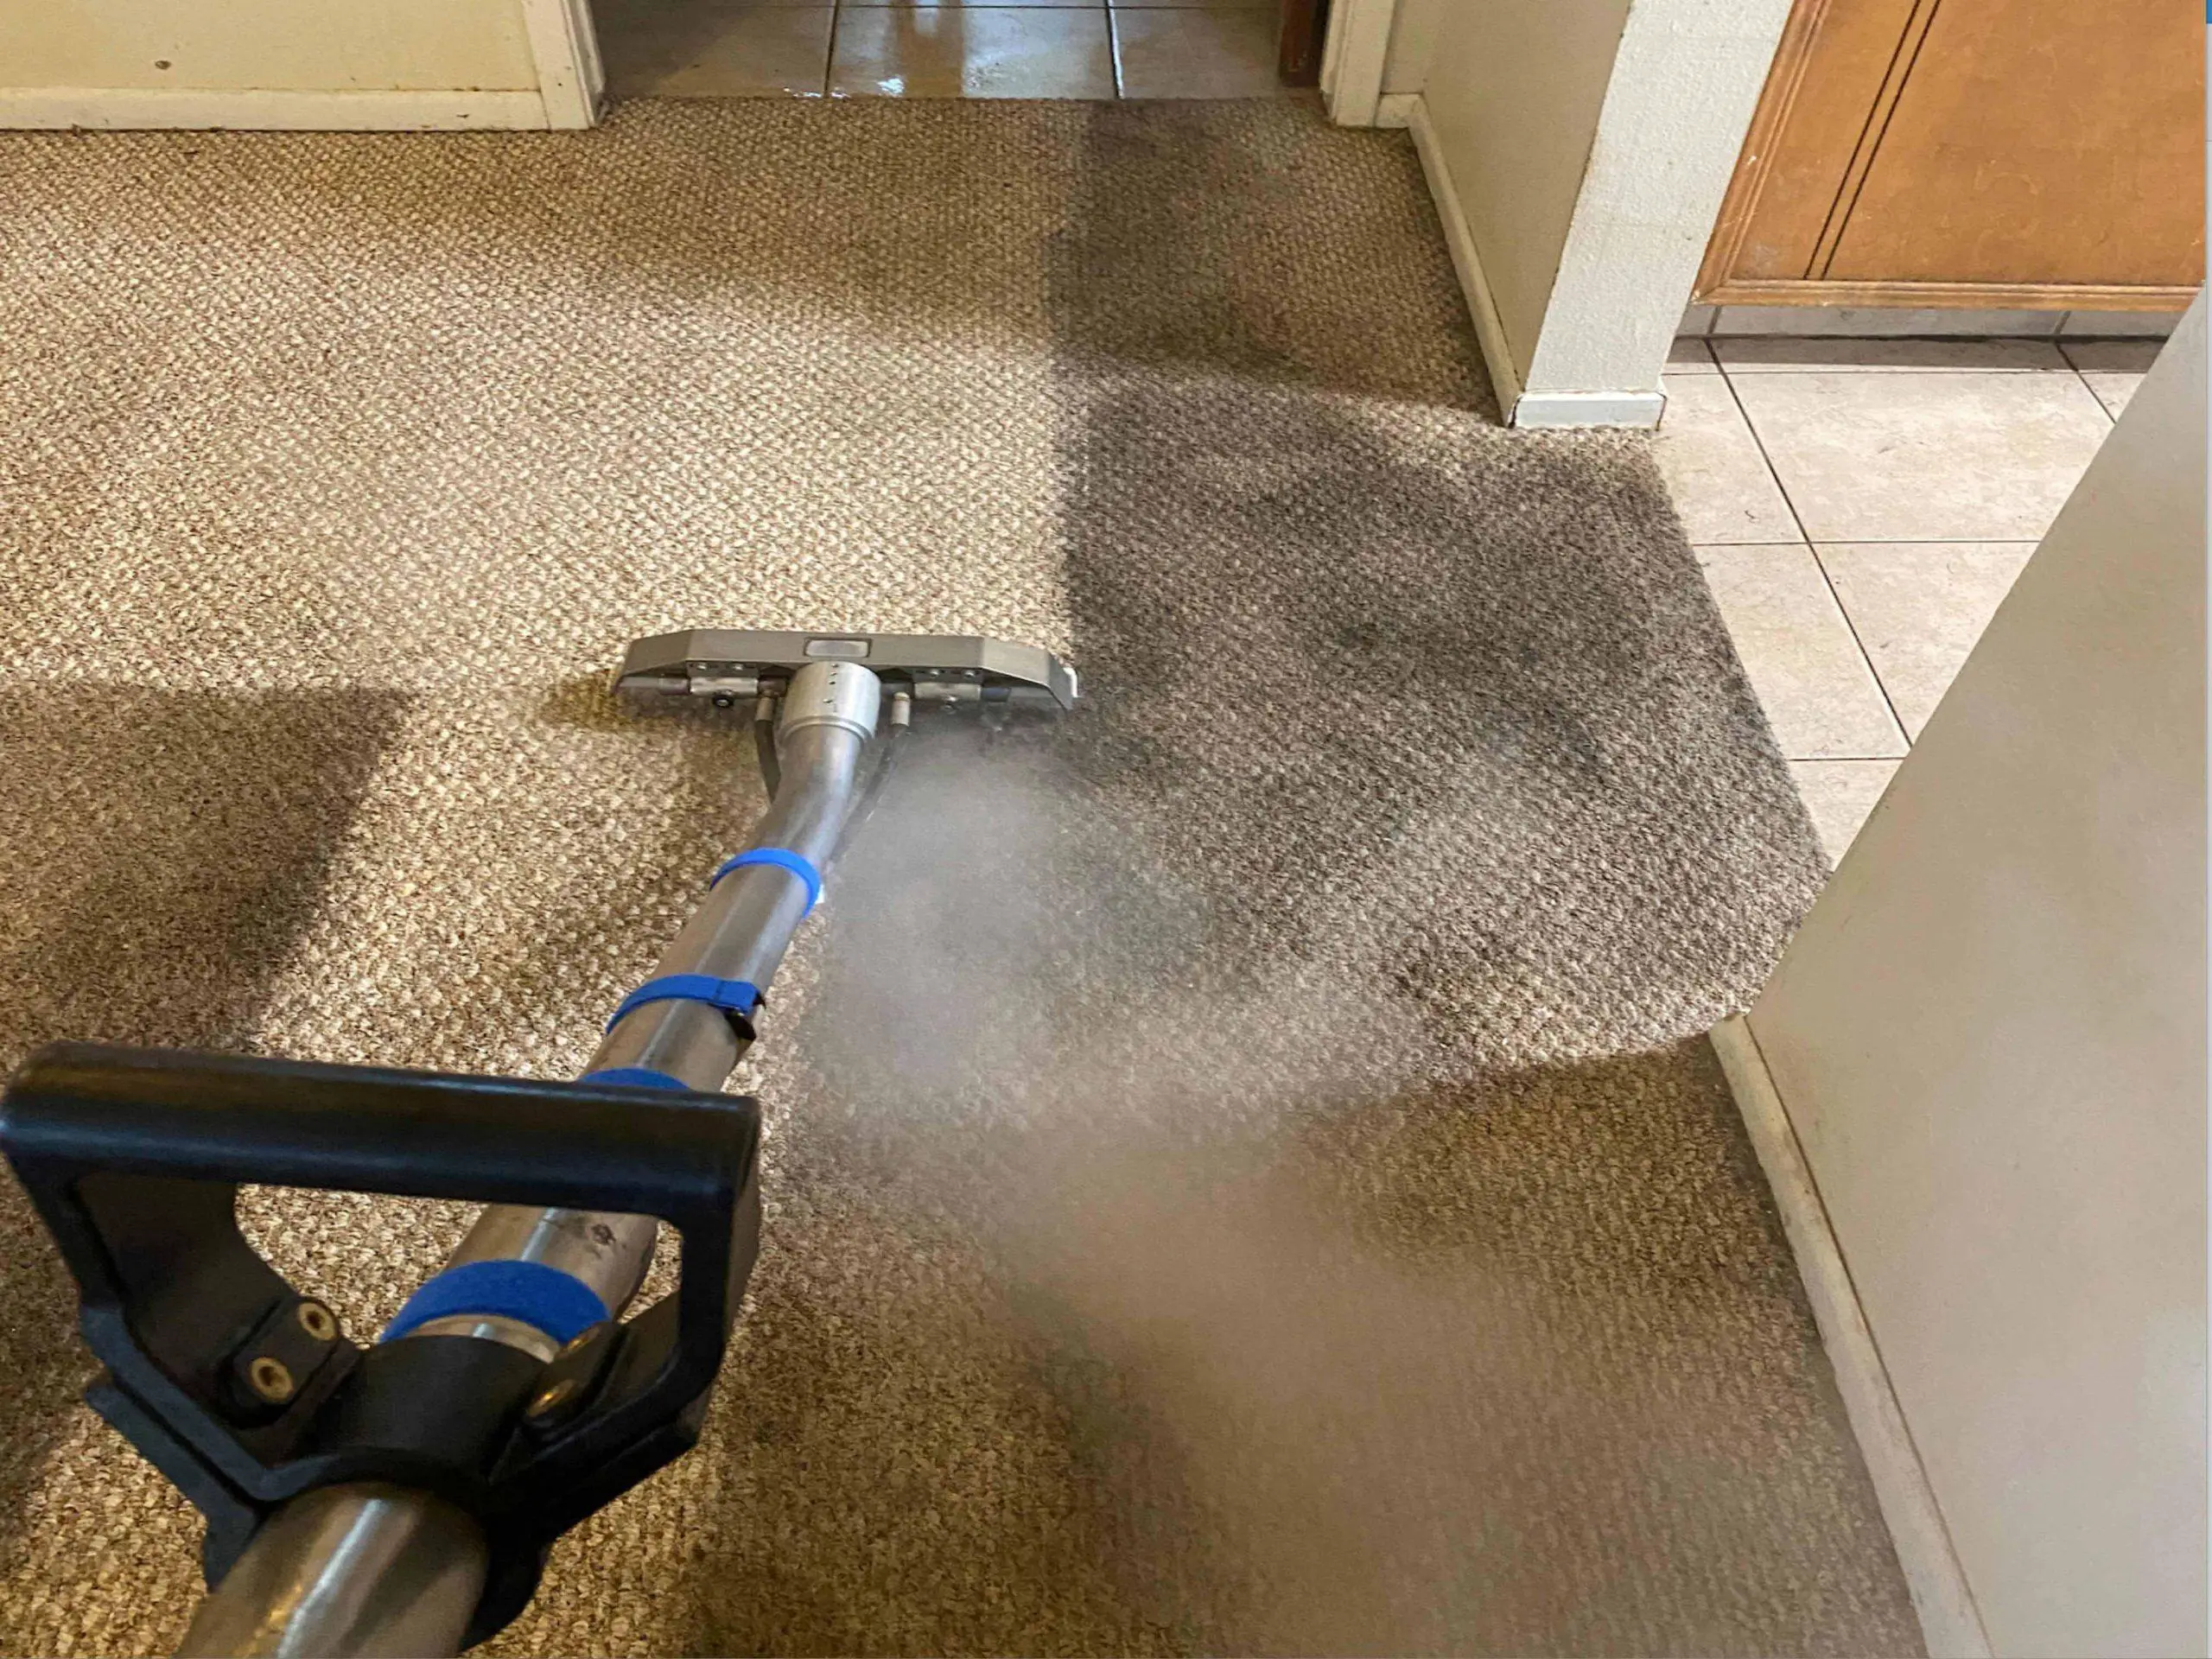 How to dry your wet carpet: easy and fast ways -5 methods